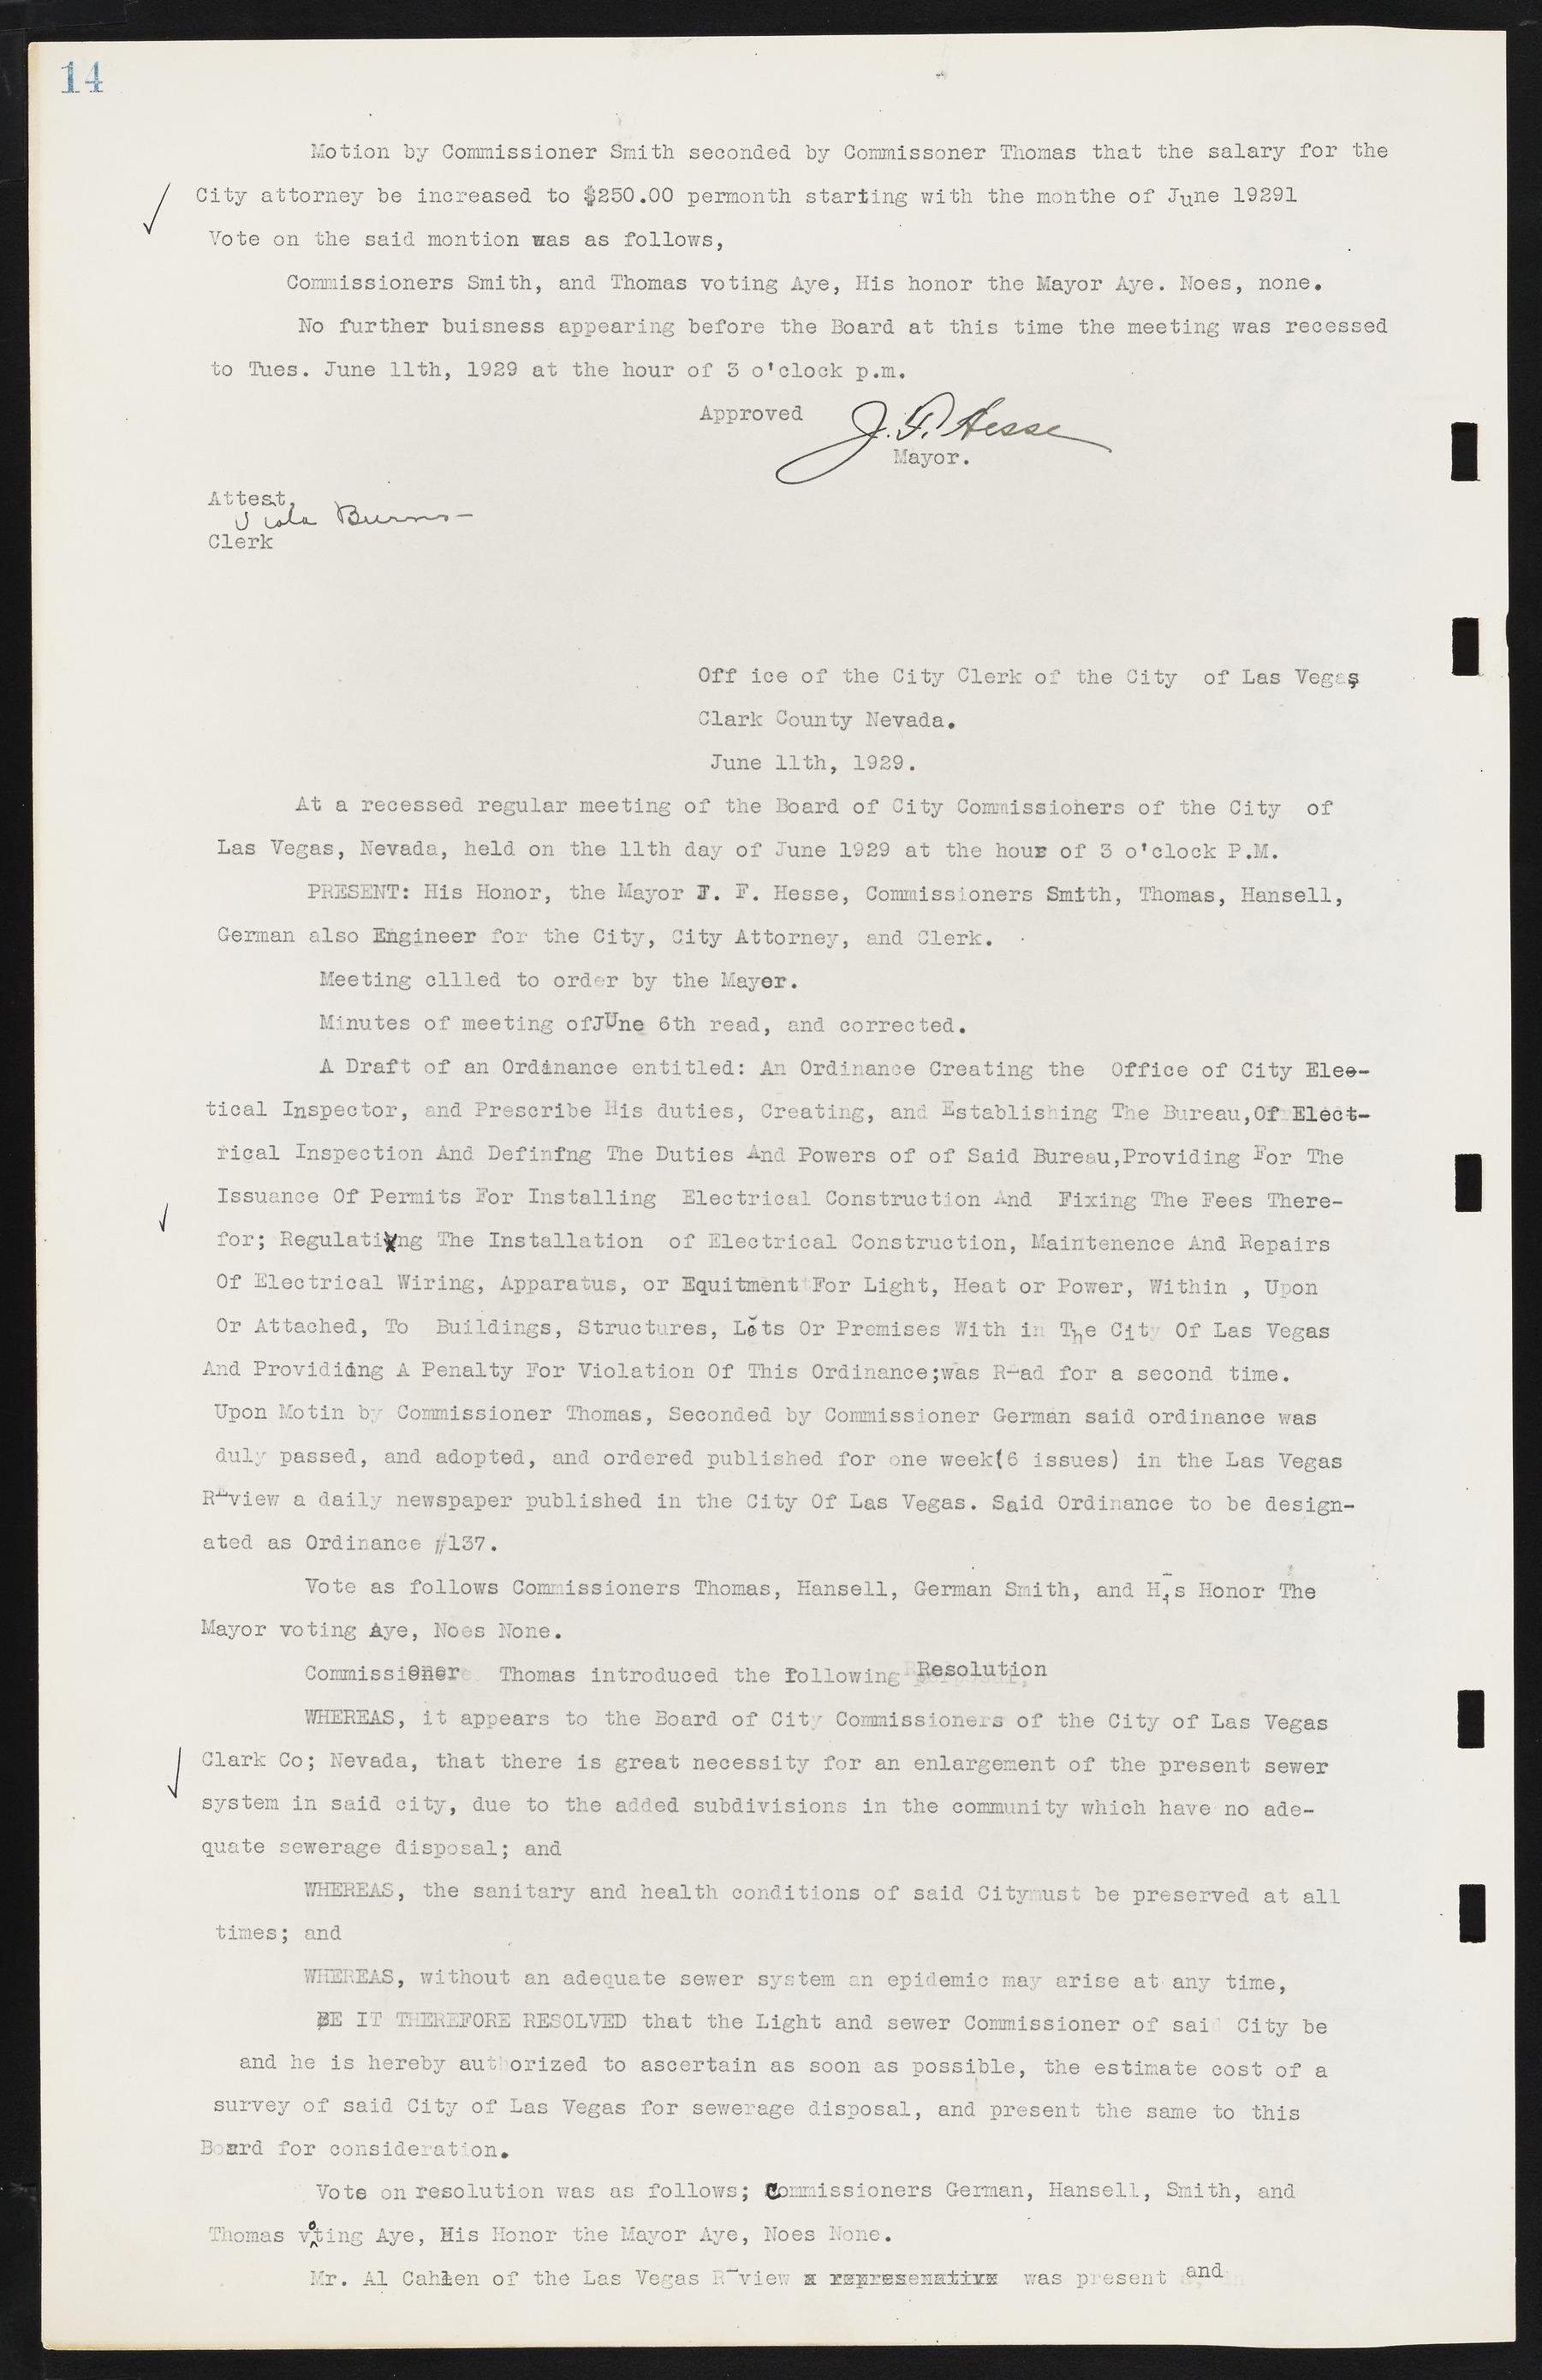 Las Vegas City Commission Minutes, May 14, 1929 to February 11, 1937, lvc000003-20